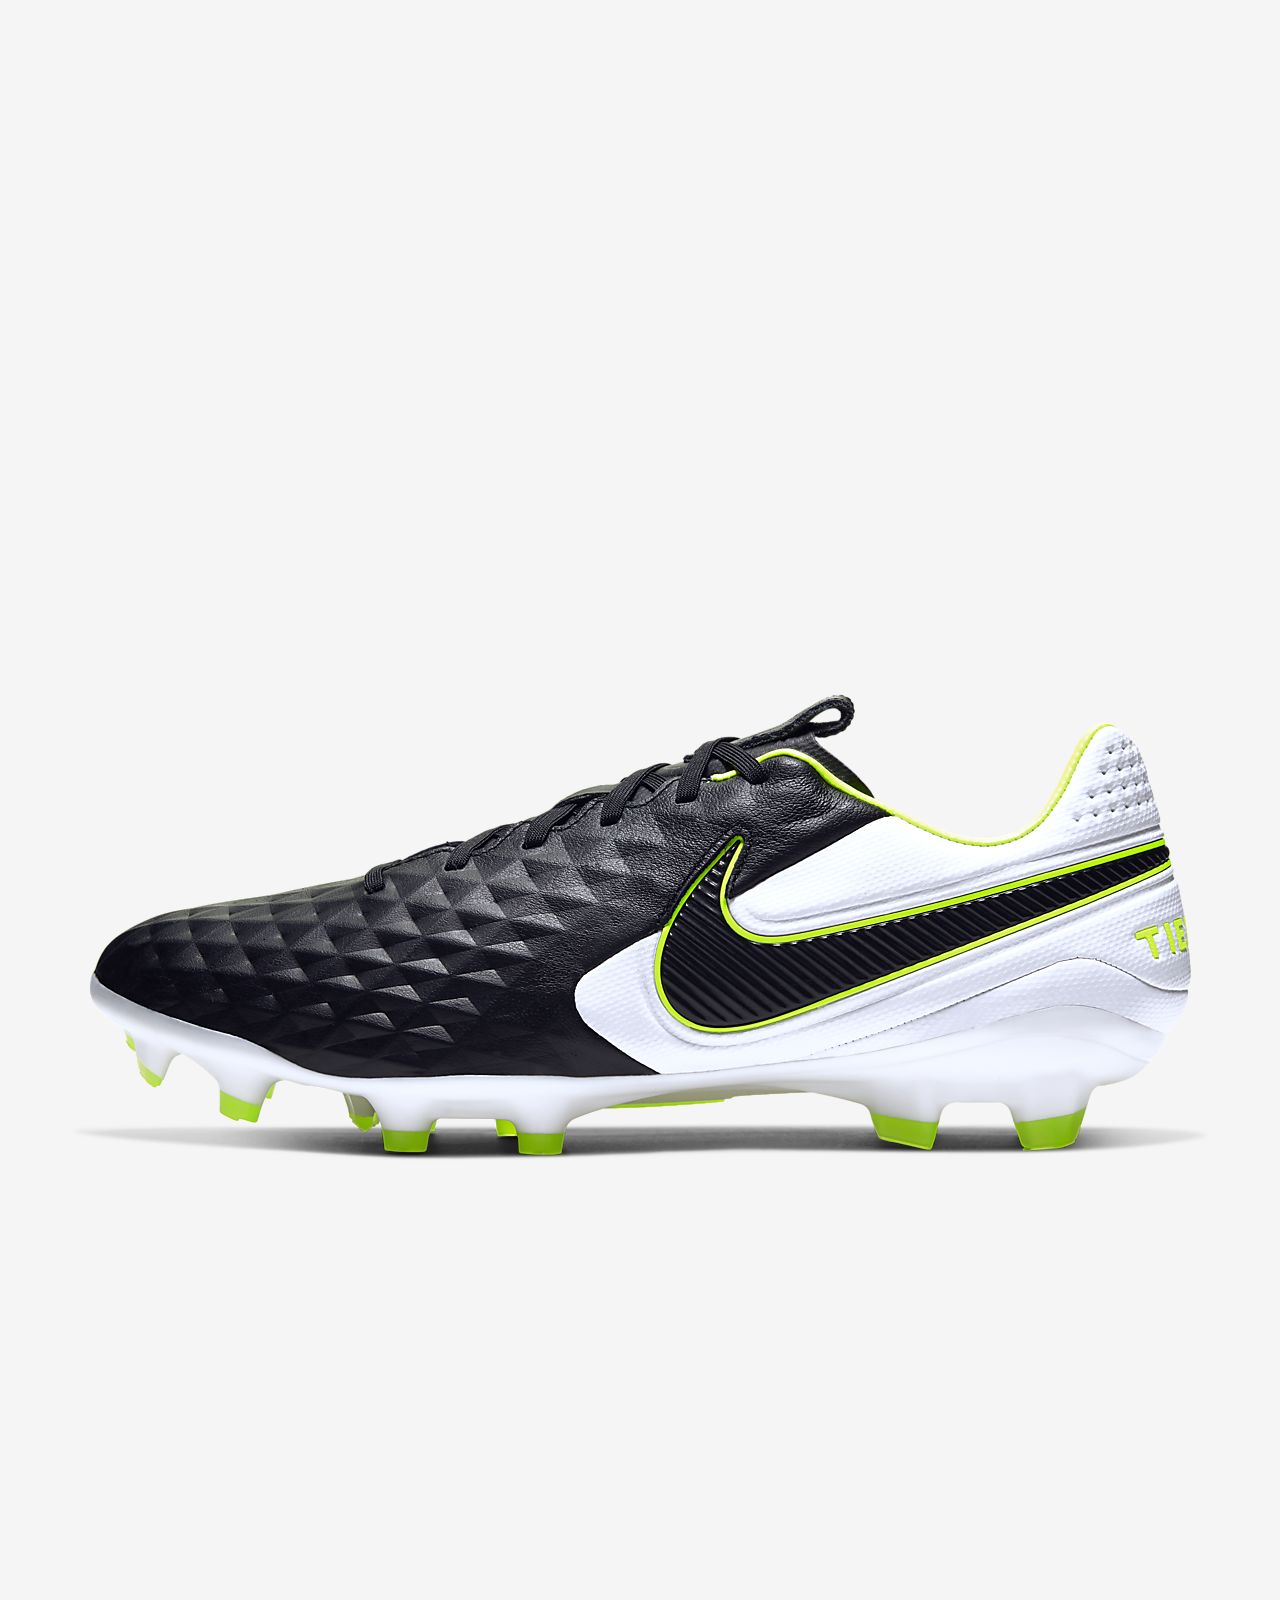 NIKE TIME LEGEND 8 THE PERFECT BOOT FOR.